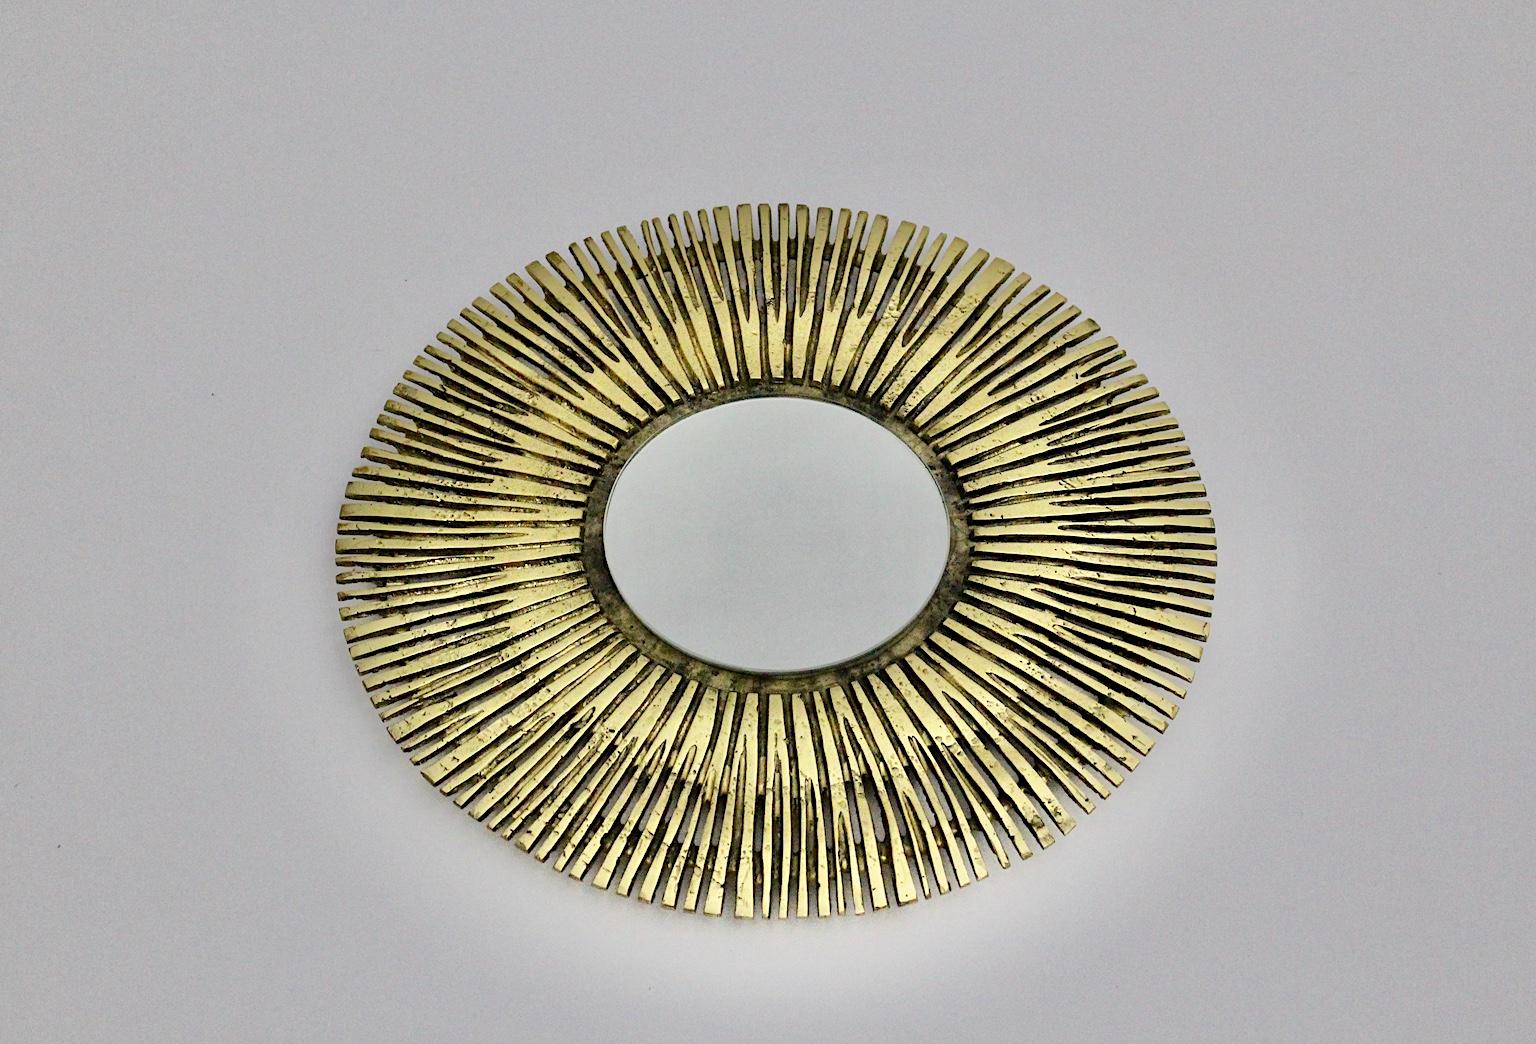 Brass Vintage Round Design Sunburst Mirror or Wall Mirror France 1960s.
A beautiful wall mirror or sunburst mirror in circular shape from solid cast brass and mirror glass. 
This extraordinary sunburst mirror is a wonderful piece from the range of